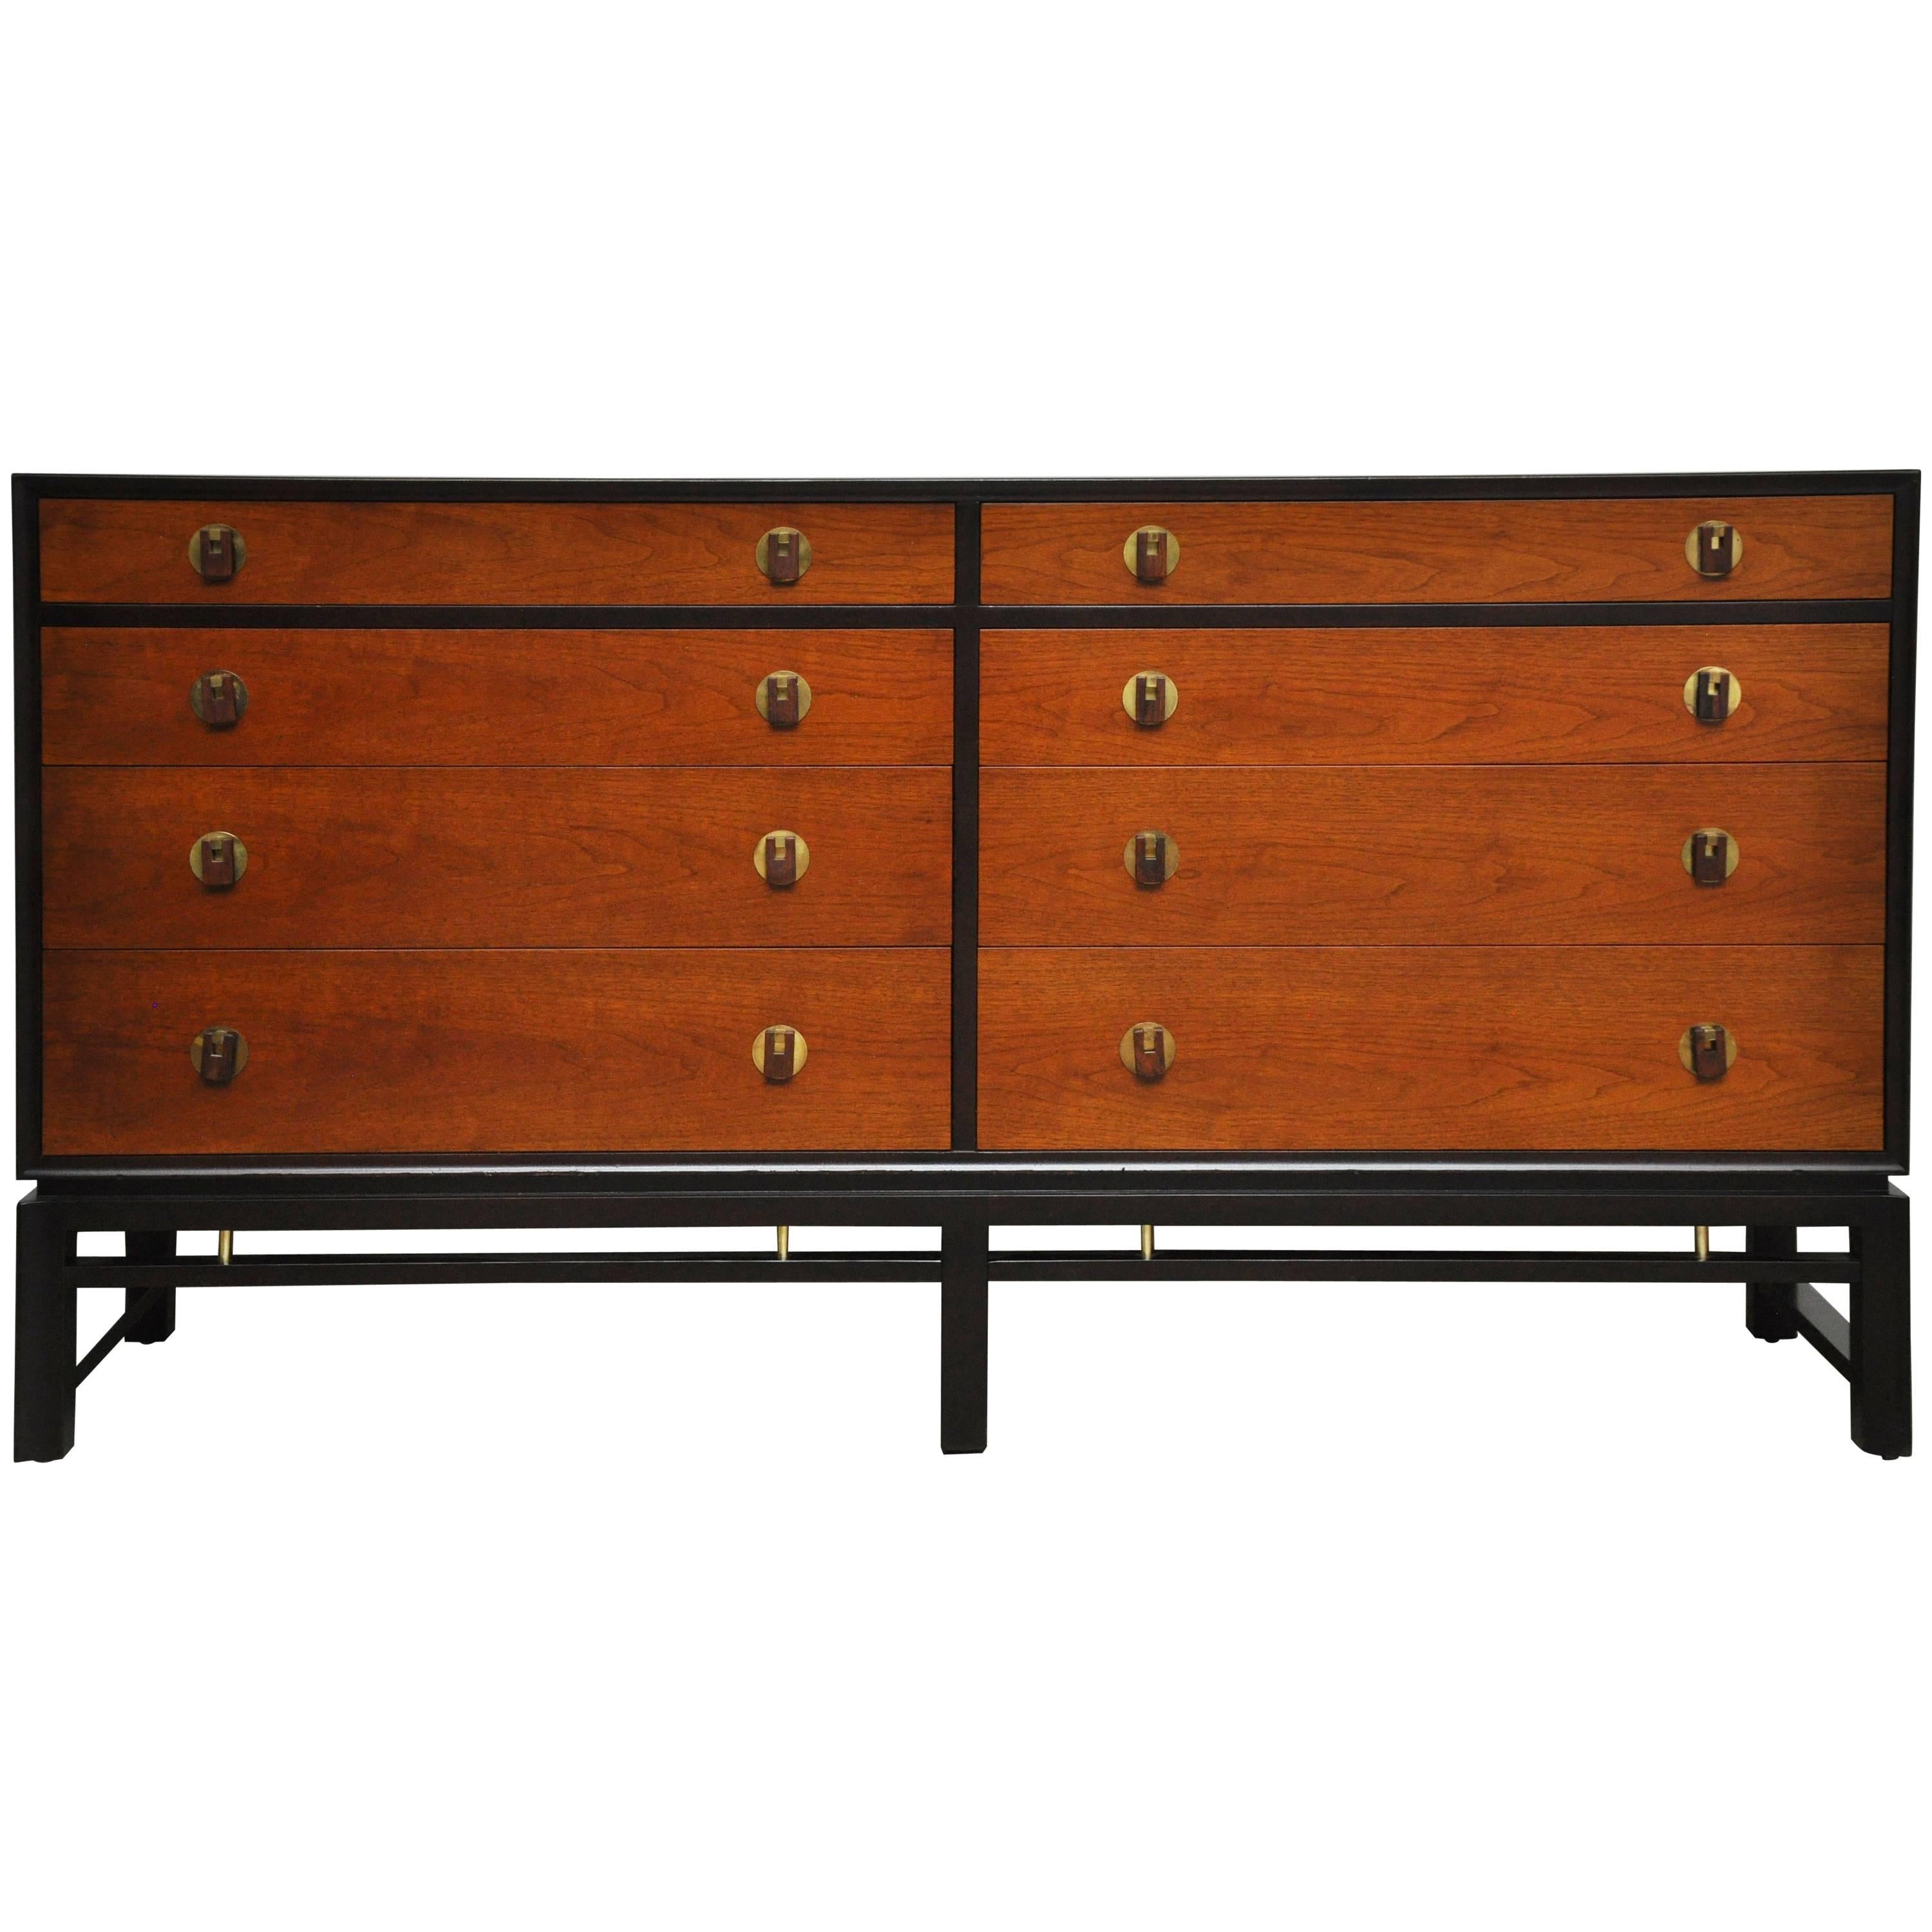 Dunbar Dresser by Edward Wormley with Brass and Rosewood Pulls